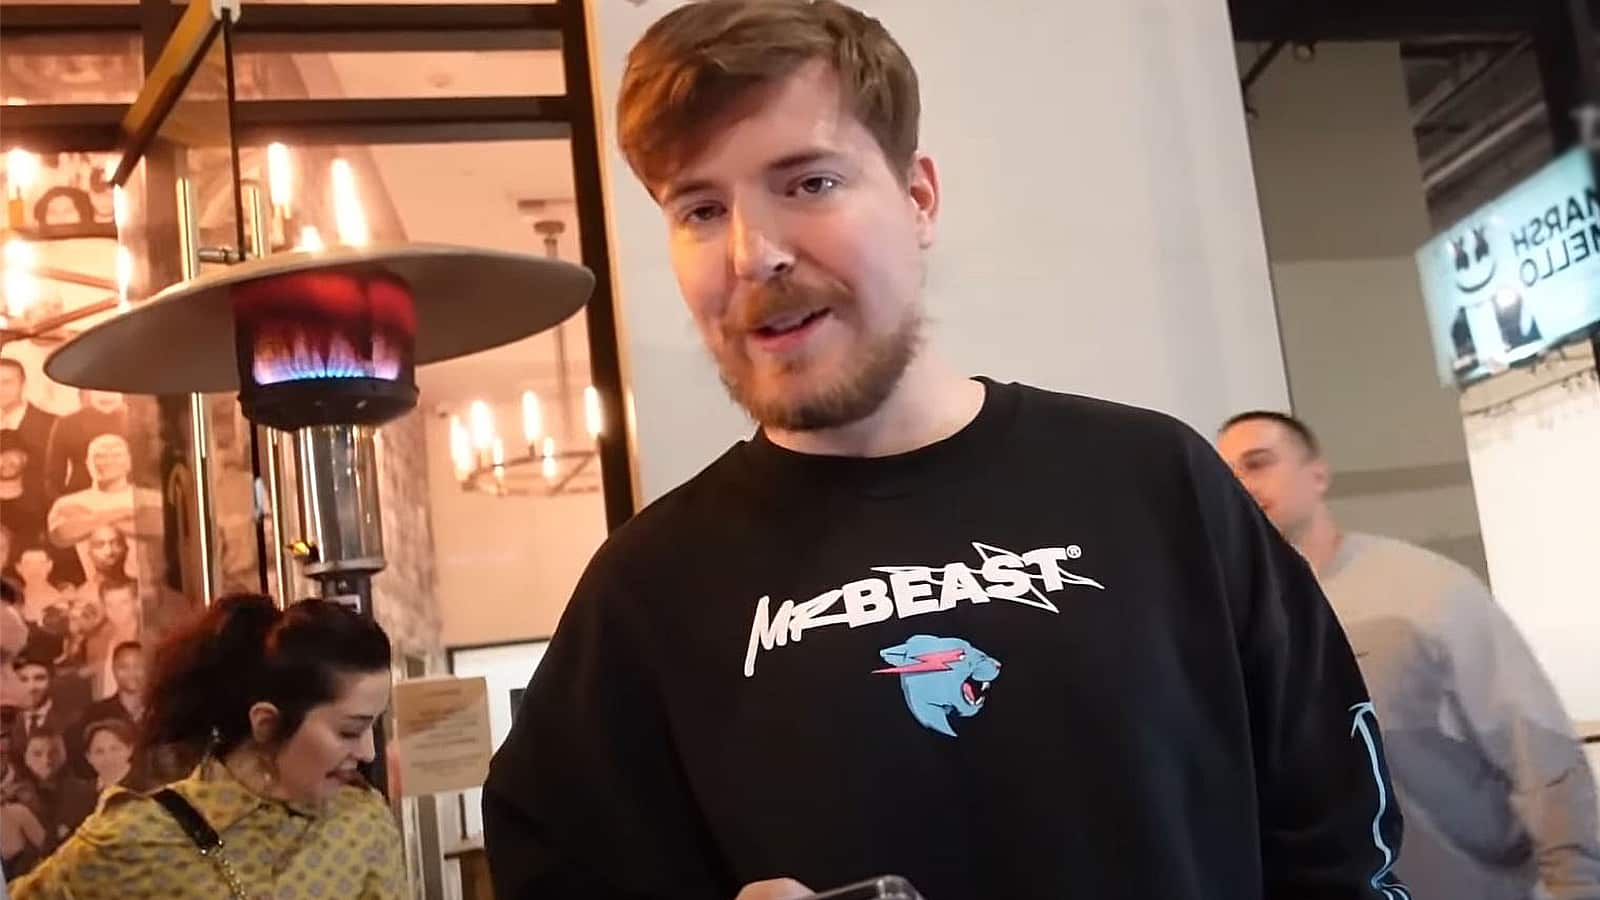 MrBeast gives advice to paparazzi youtube channel